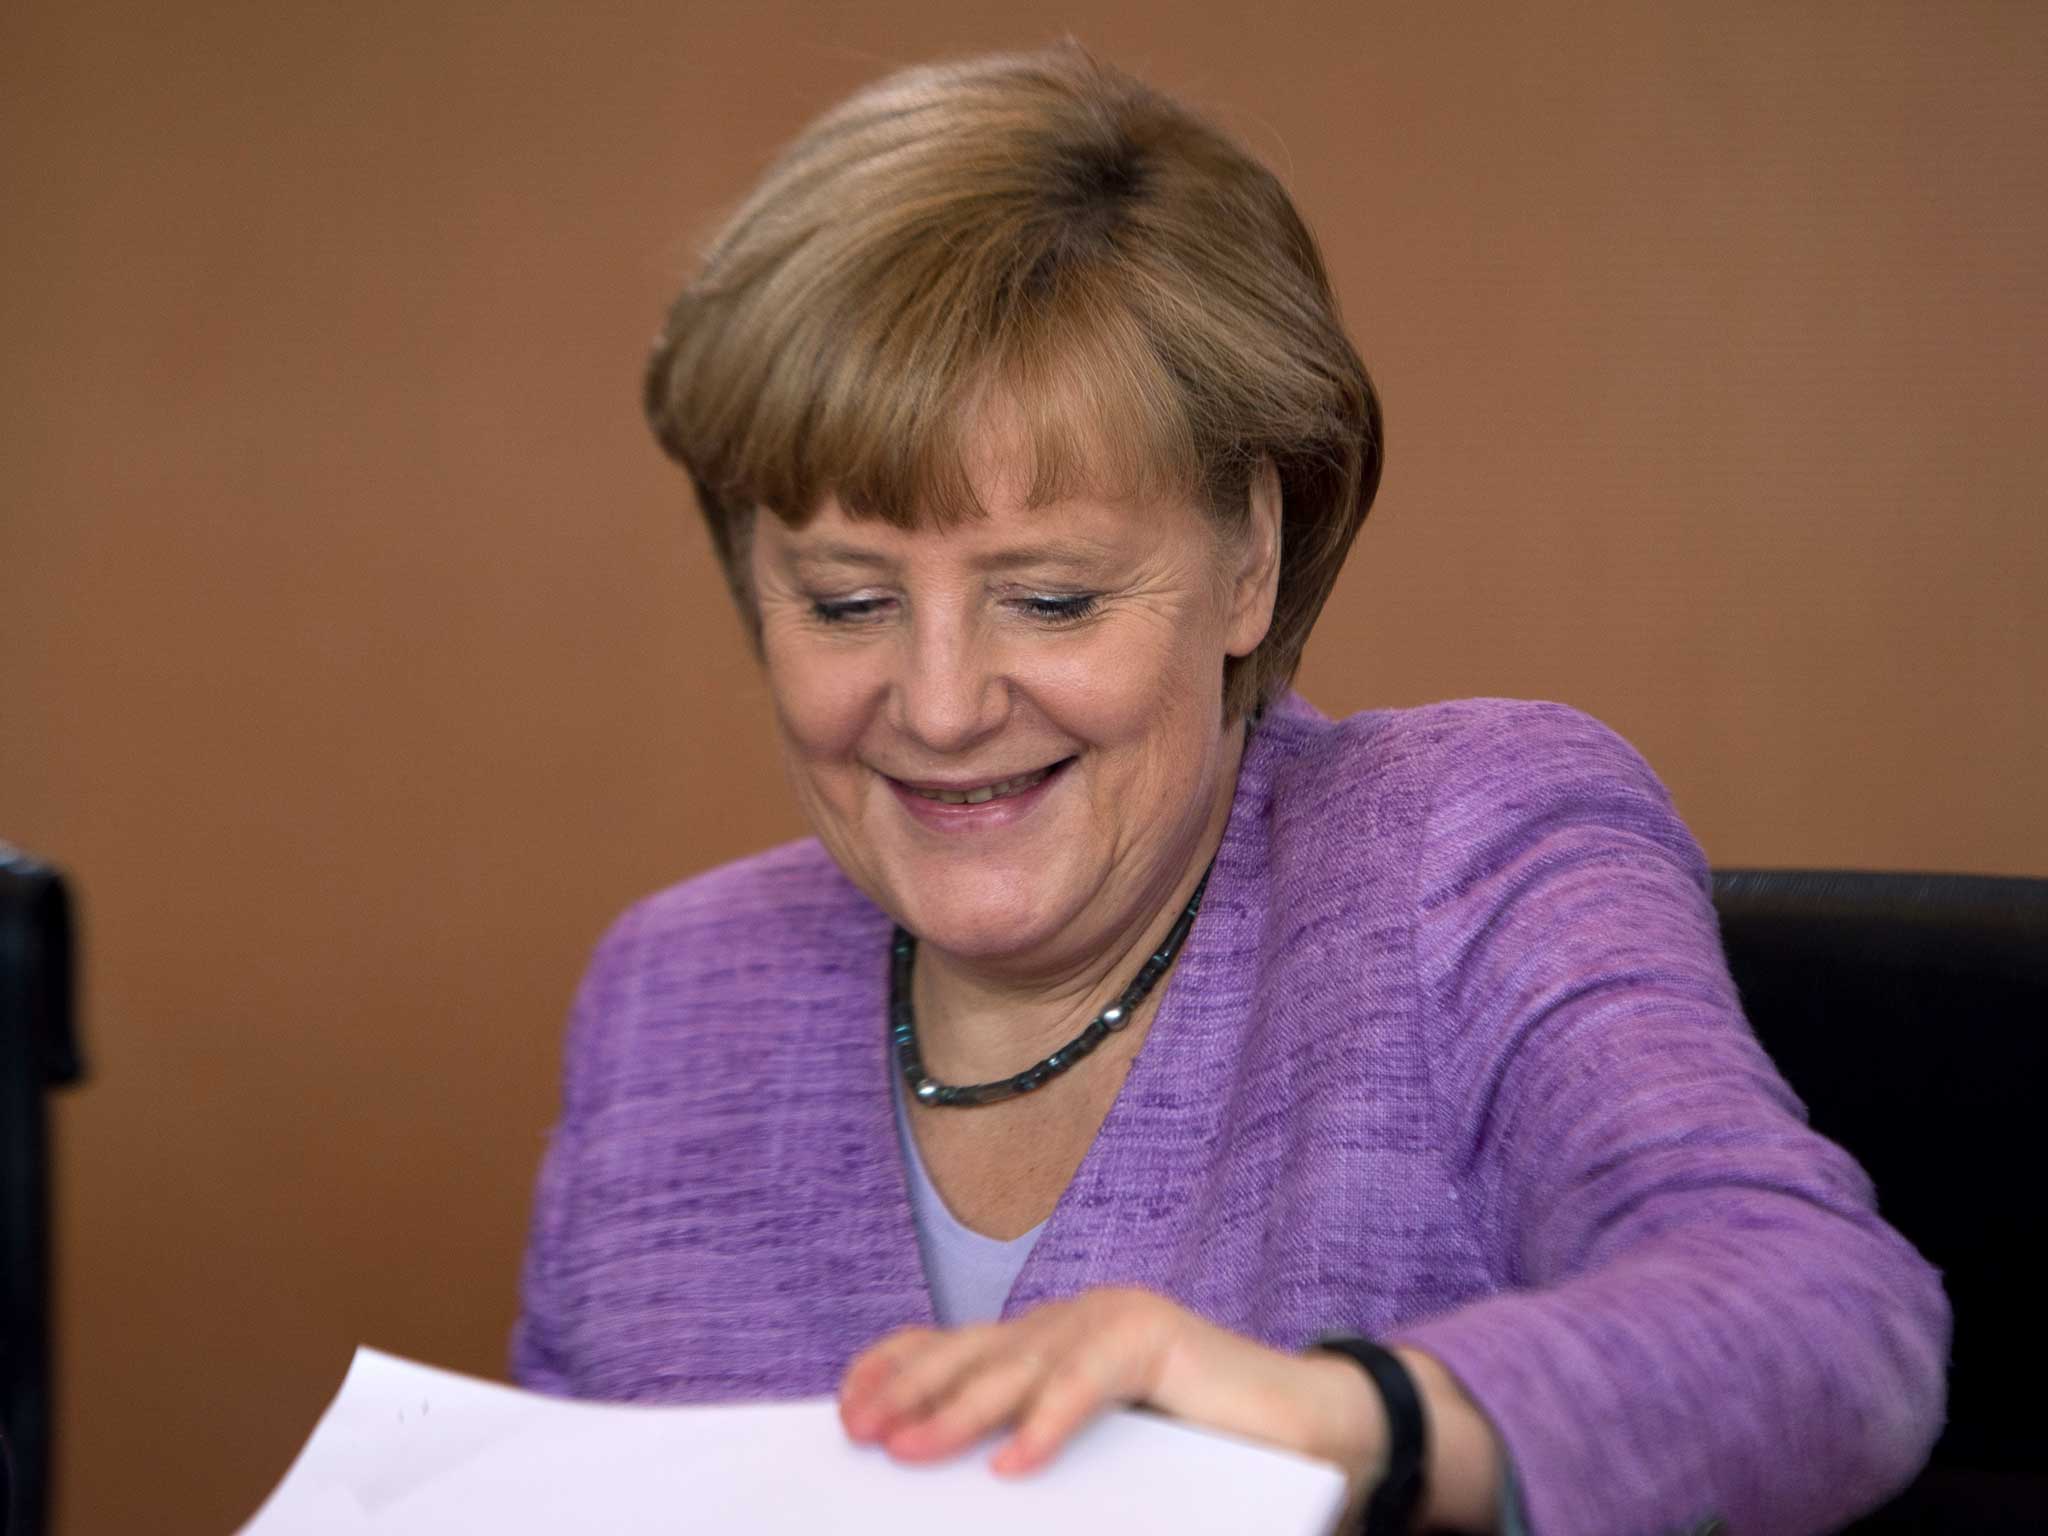 Angela Merkel will discuss with EU leaders in Berlin today how to tackle chronic youth unemployment